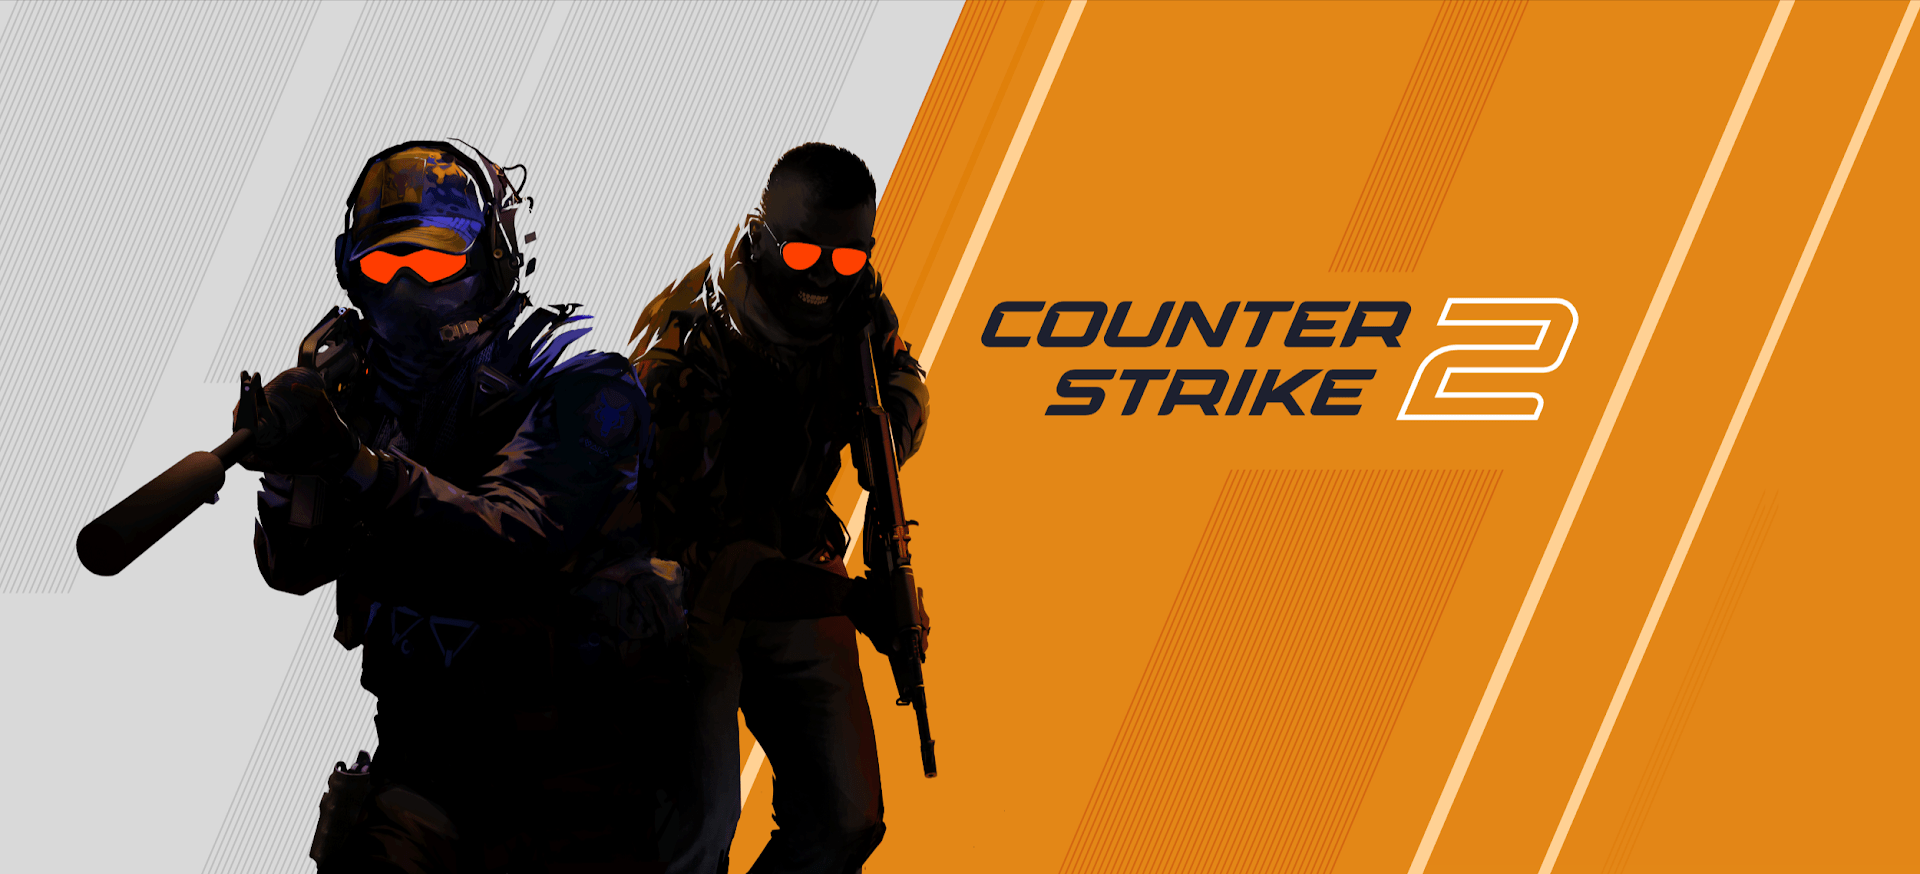 First ratings for Counter-Strike 2 are now being gathered. See what professional players have to say about the game.